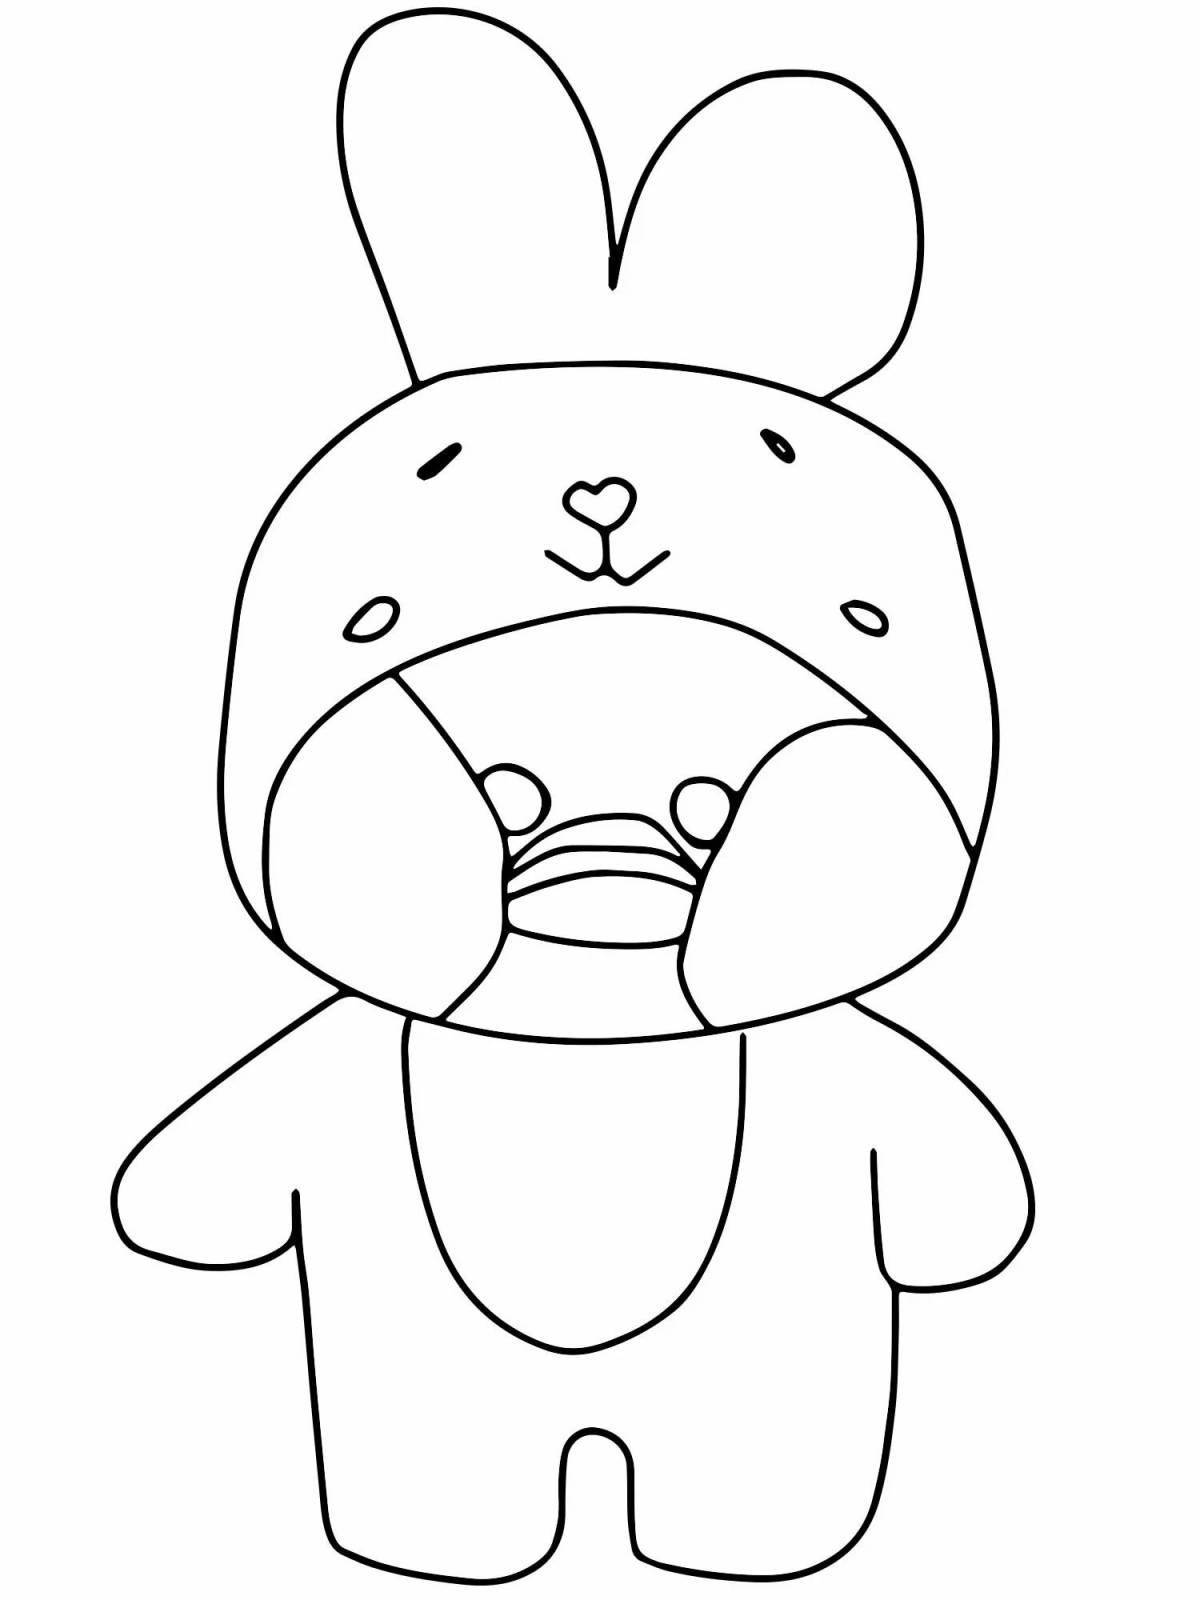 Cute lalaphan coloring book for kids